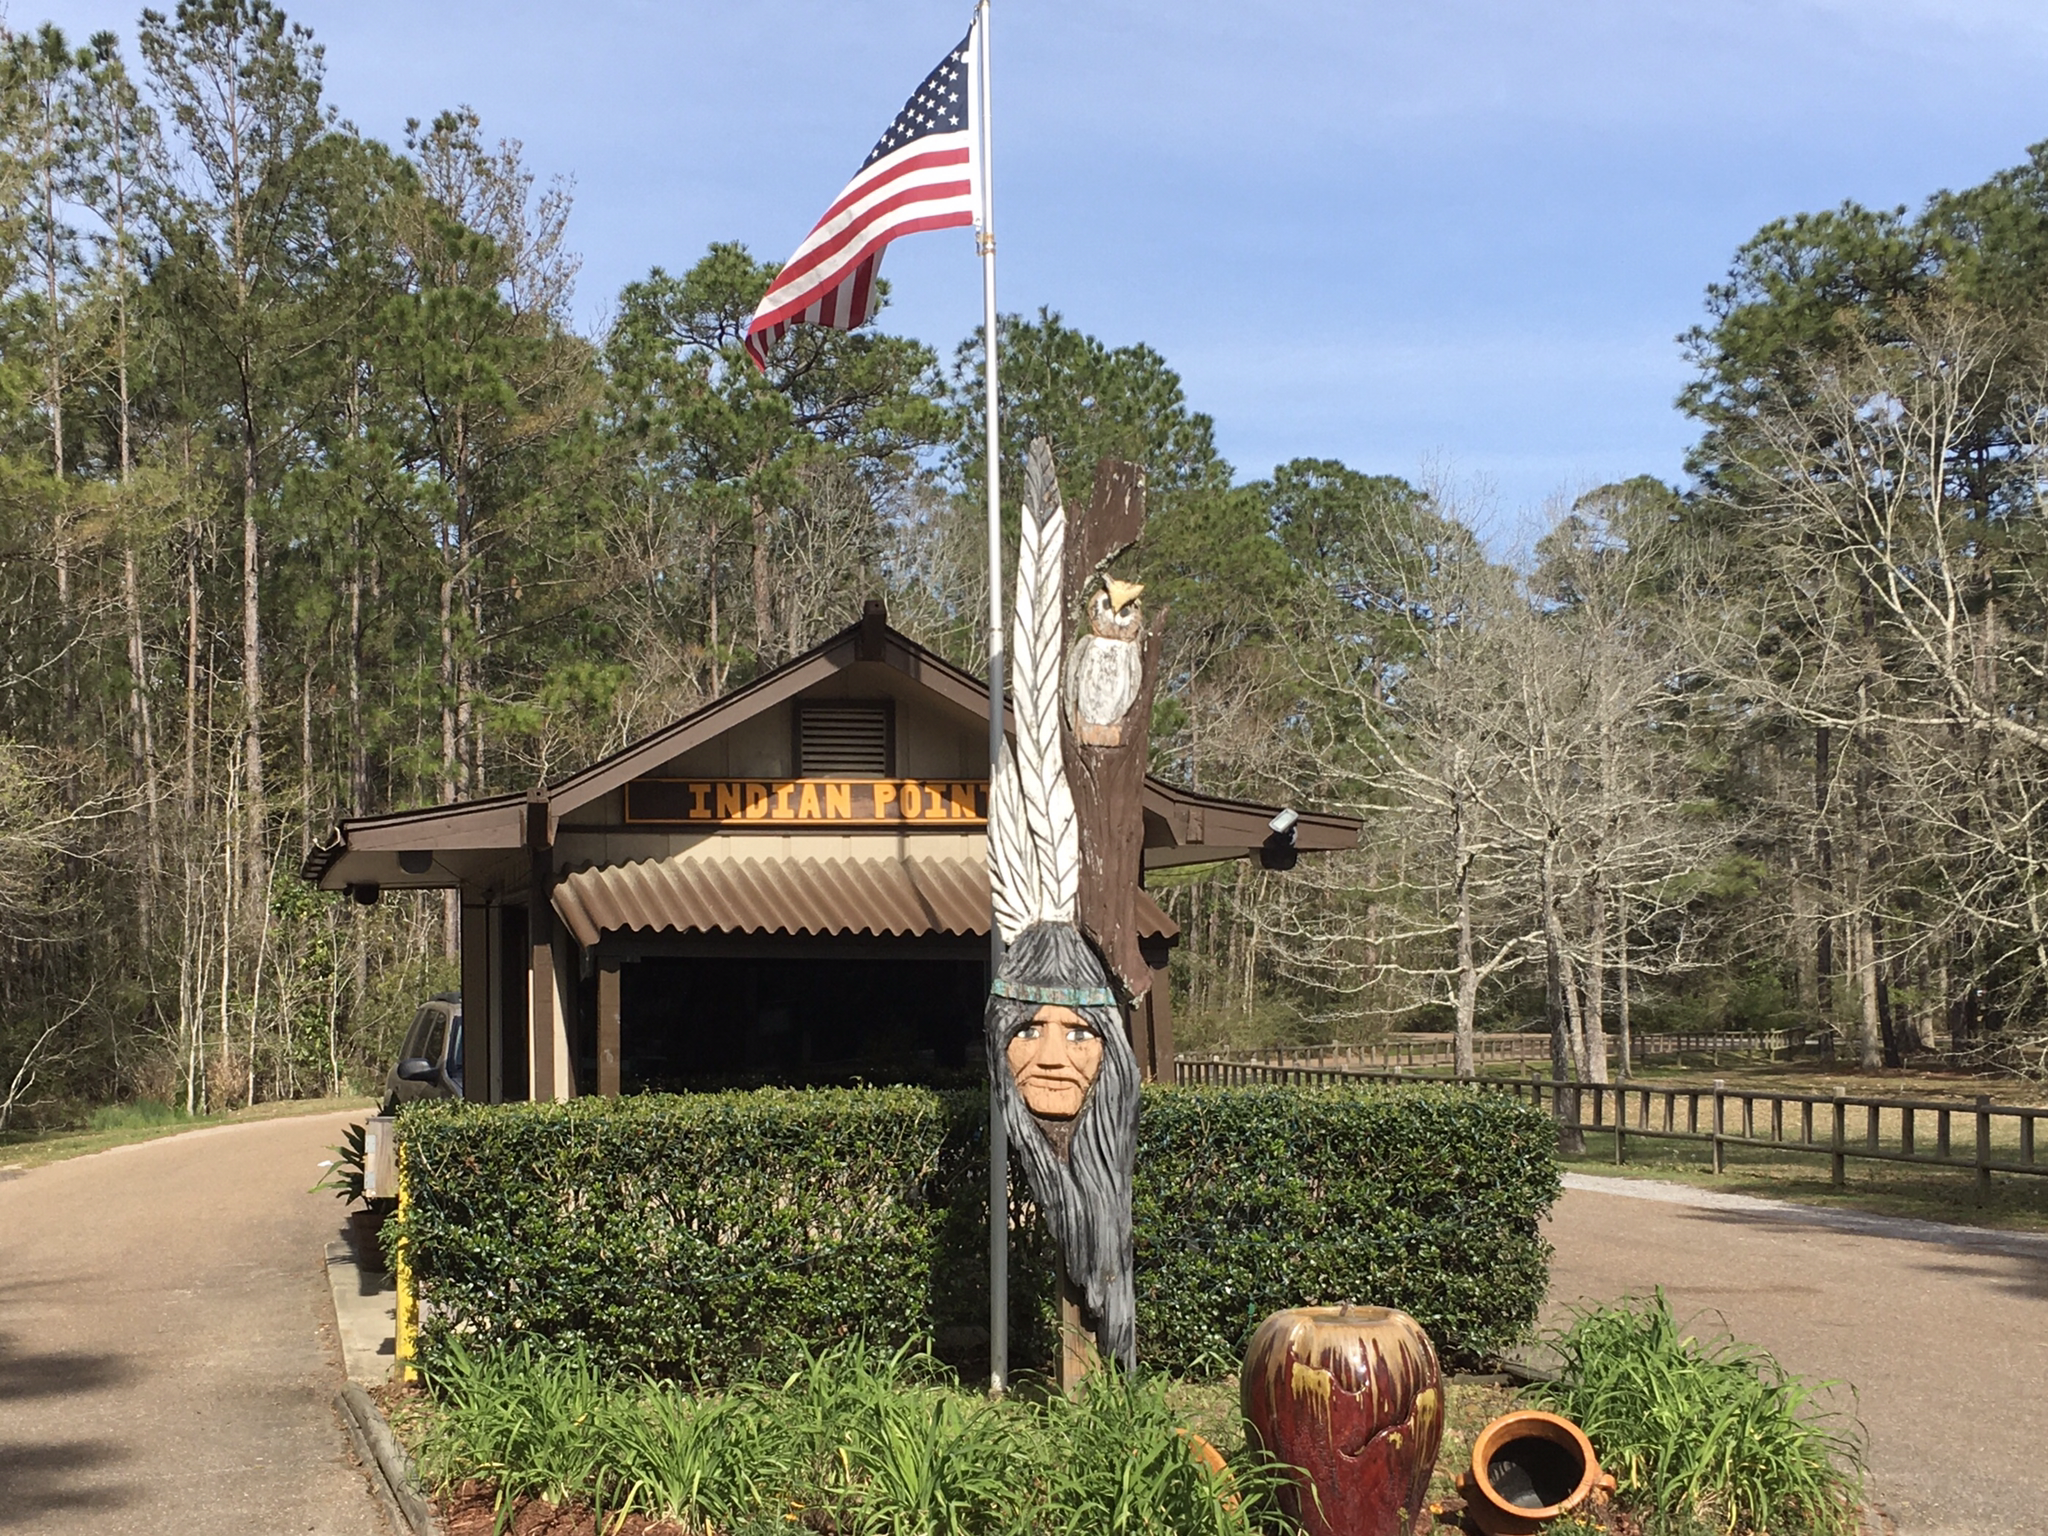 Stay in the Great State of Mississippi — a totem pole and American flag next to an entrance hut.